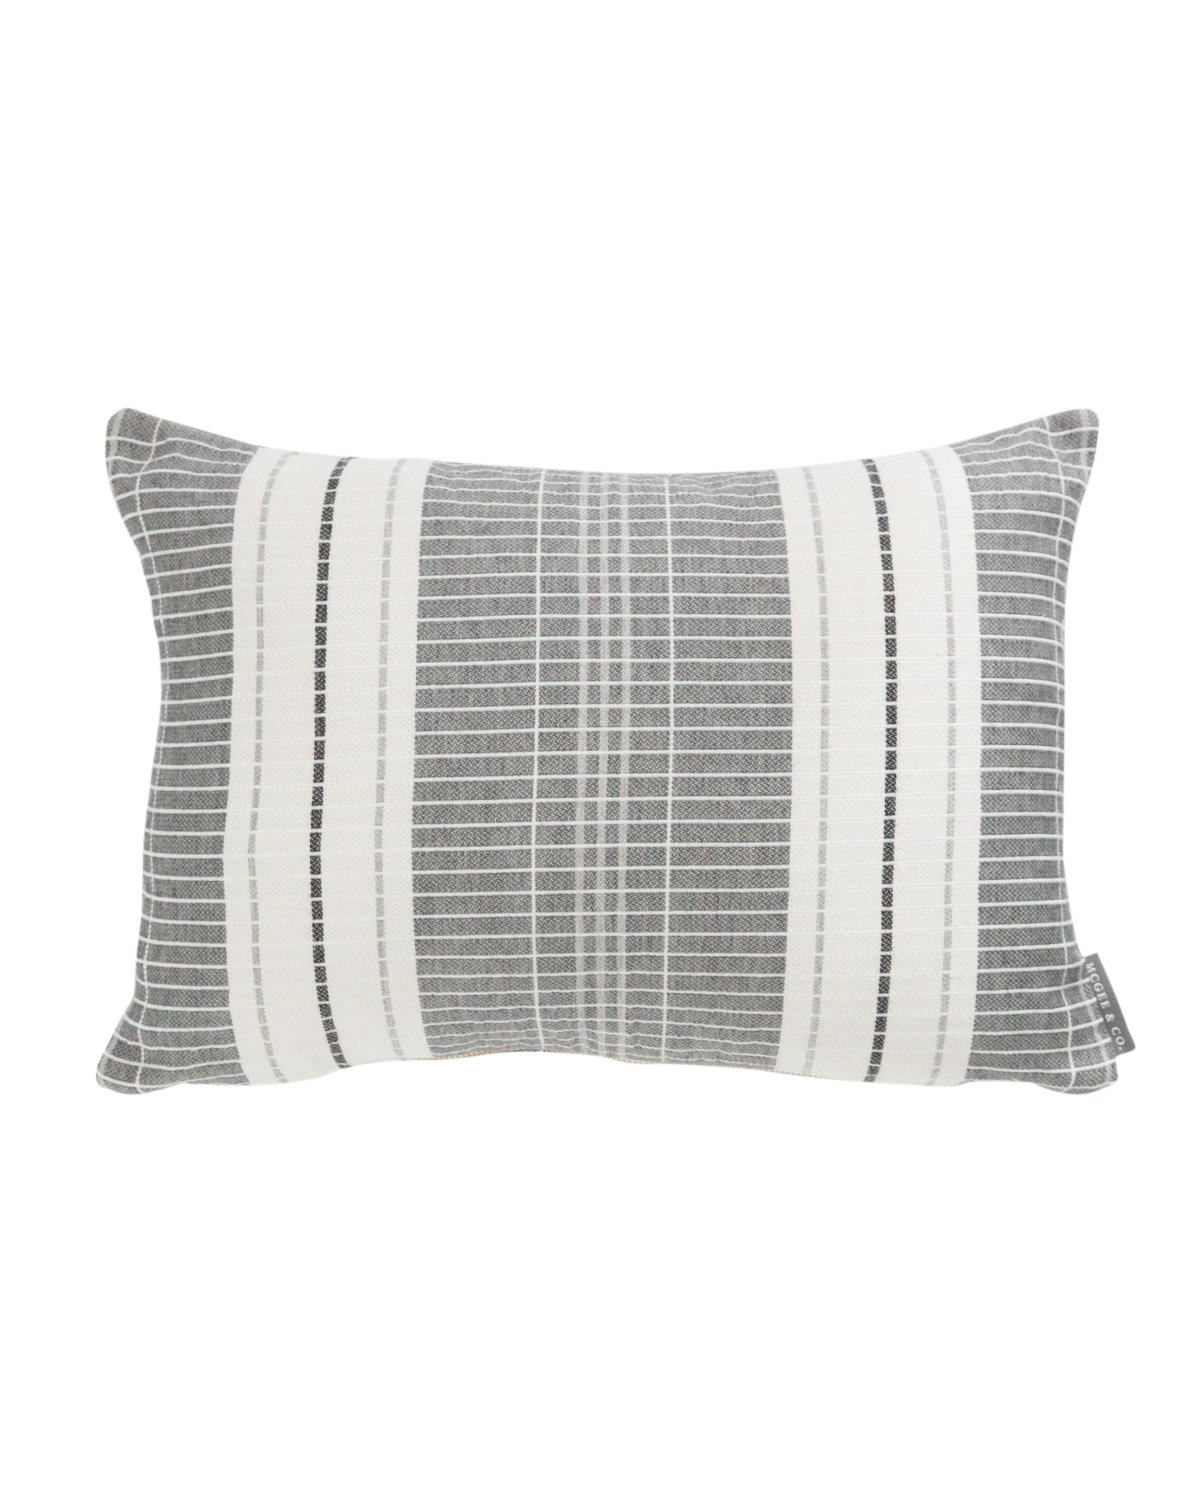 OXFORD WOVEN PLAID PILLOW COVER - Image 1